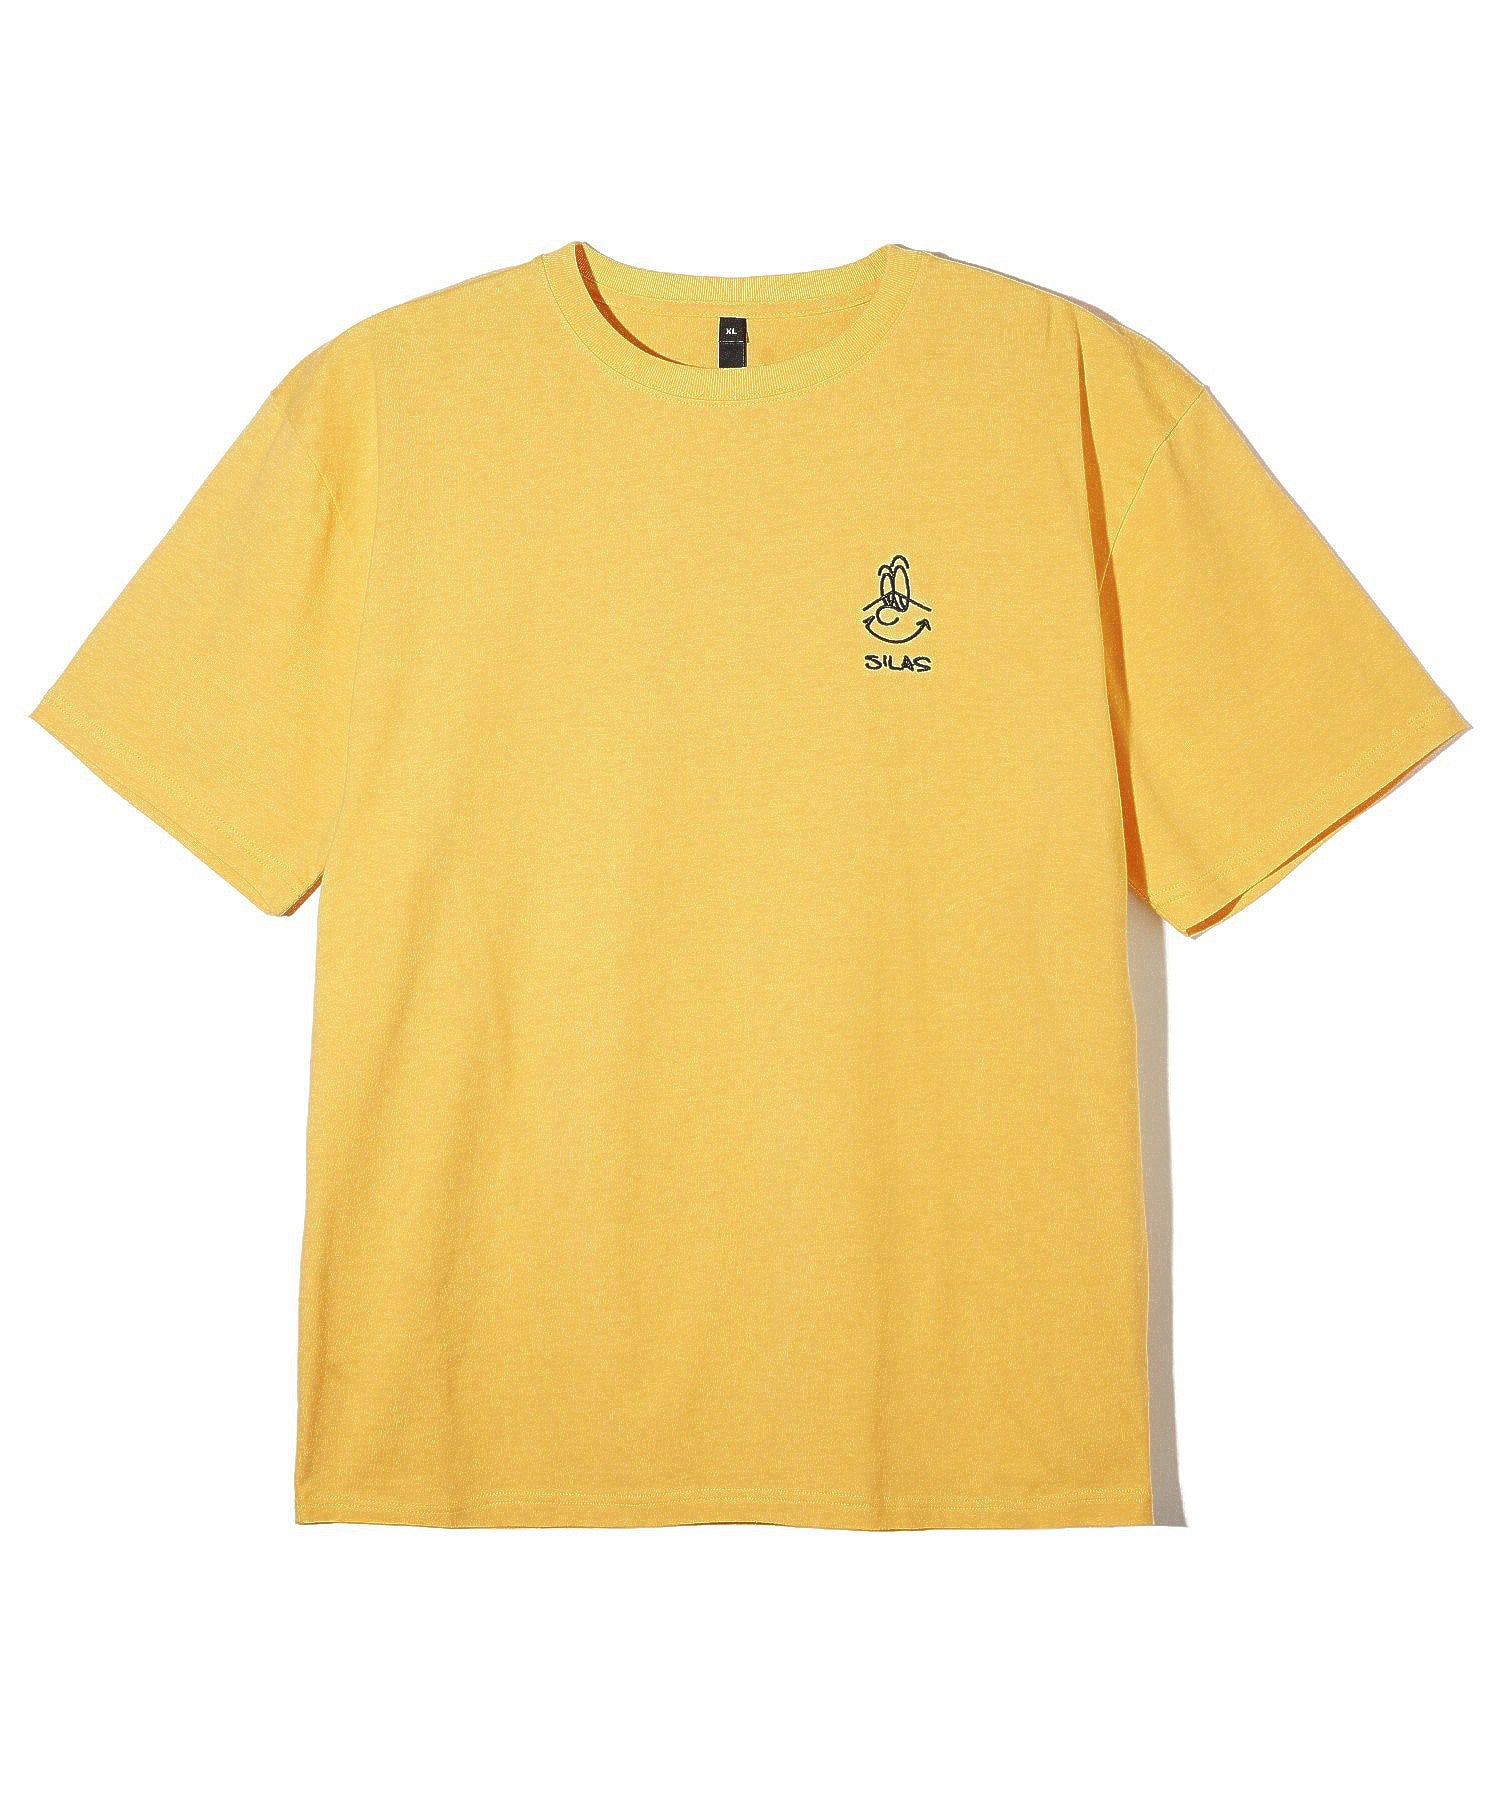 SILASxMAW MikeL S/S TEE